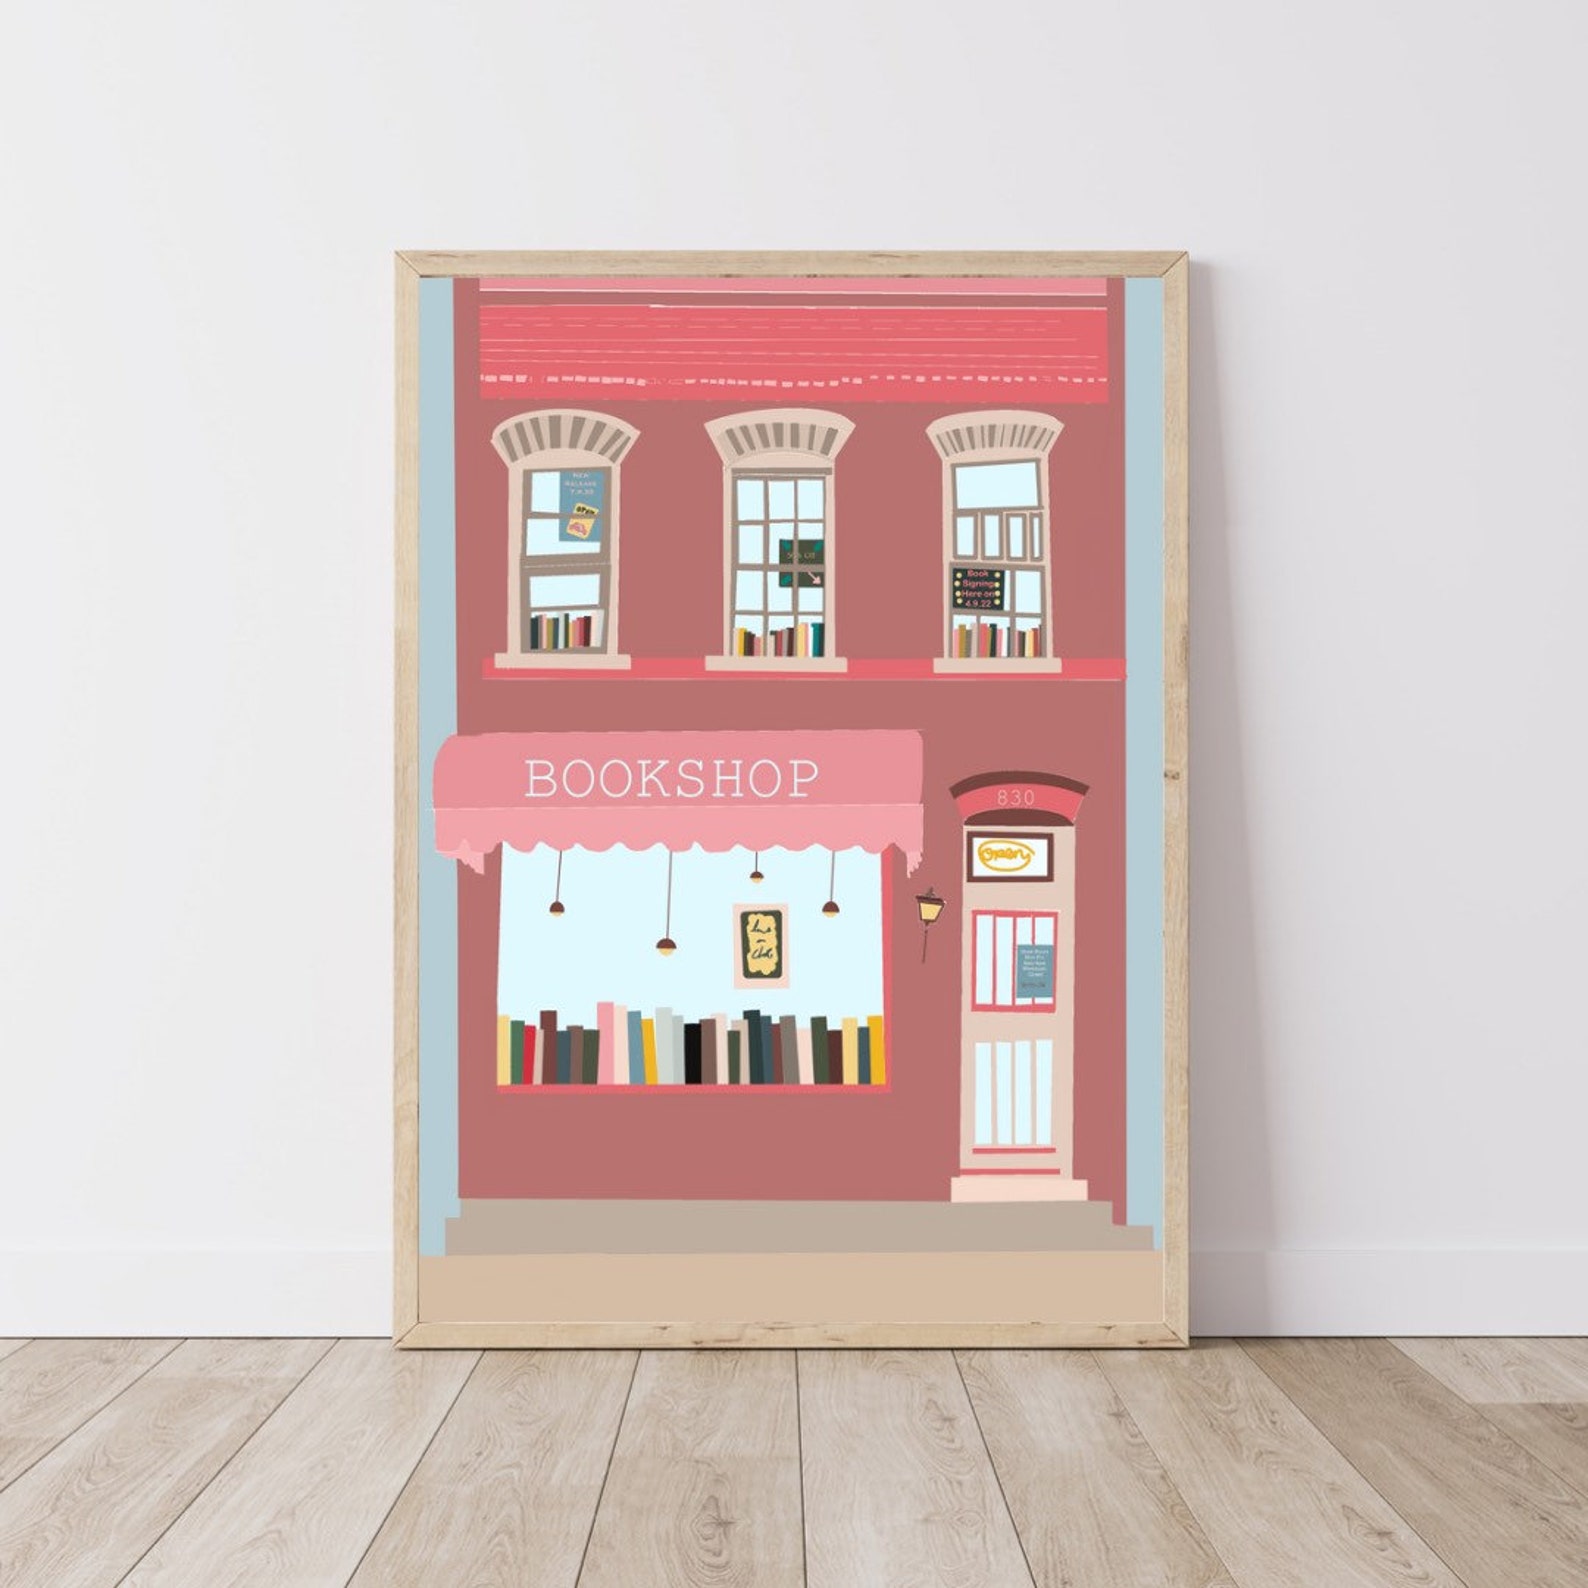 Print of a pink two story brick bookshop with glimpses of bookshelves in the windows.